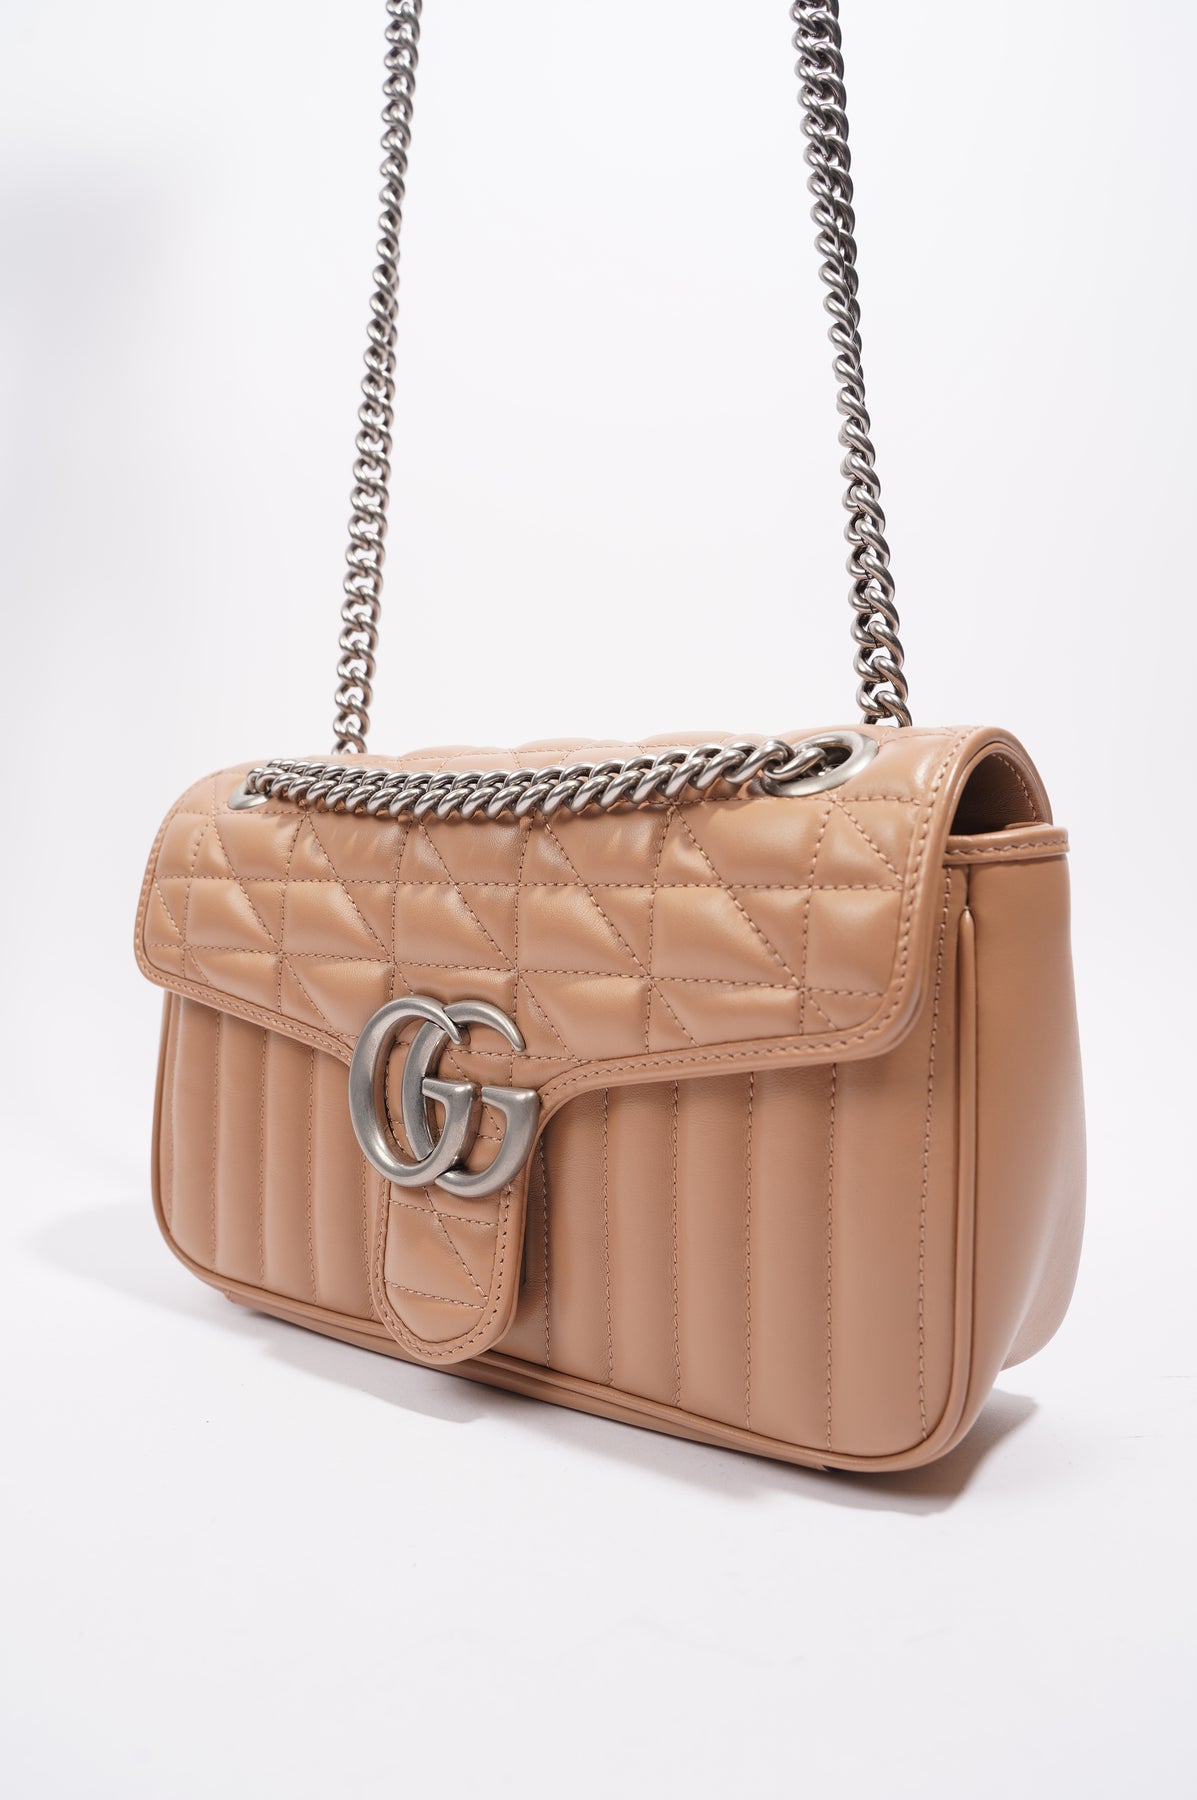 Sold Gucci Marmont 26 cm Nude 90%